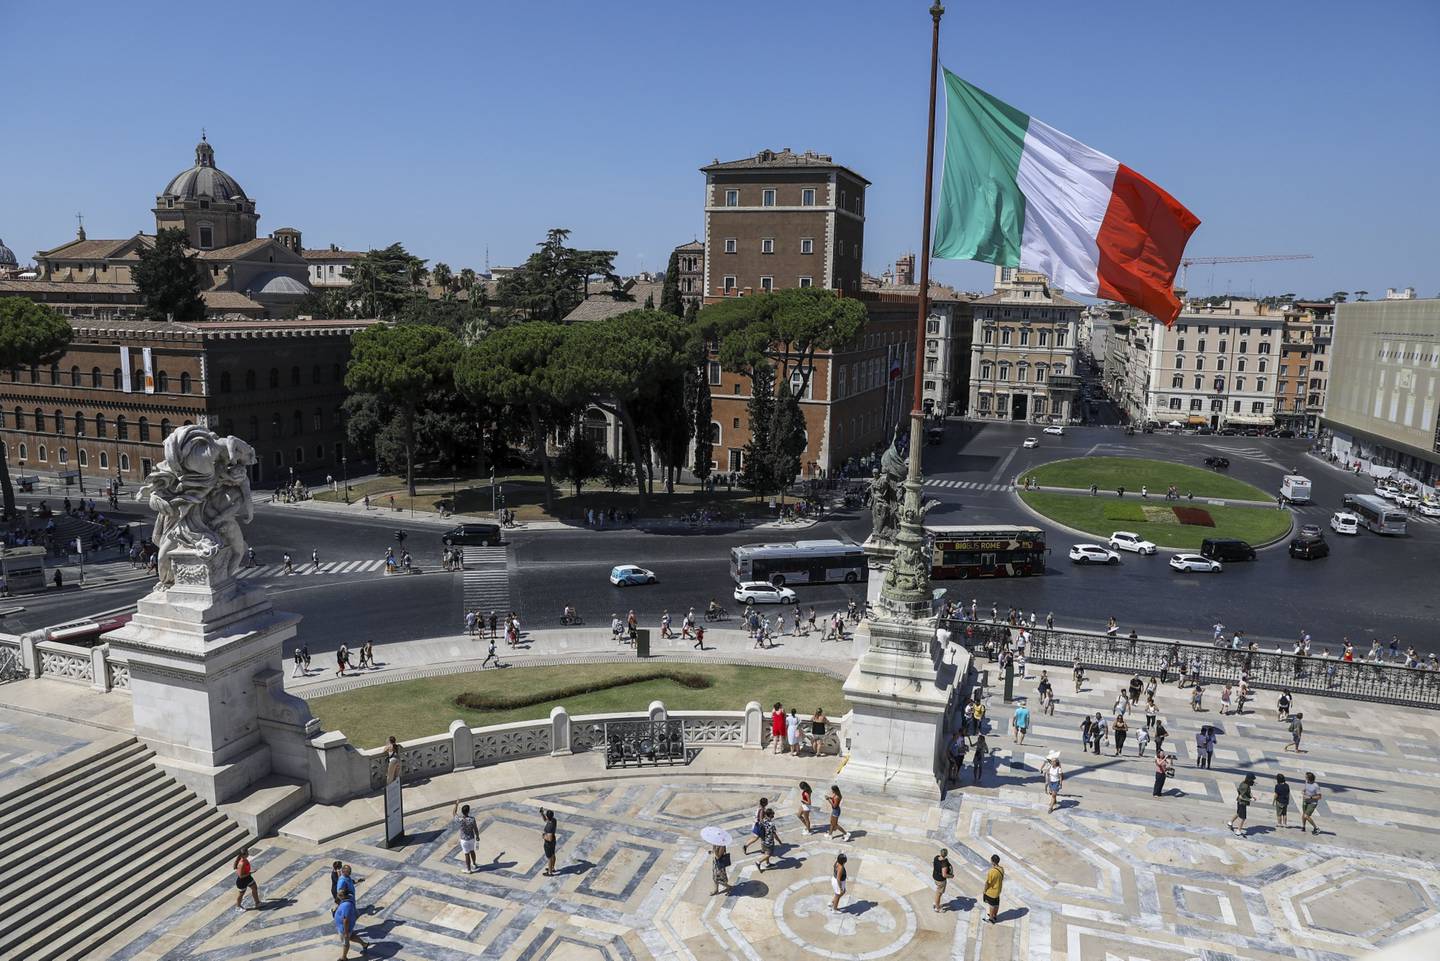 The Italian national flag flies near a monument to the unknown soldier in Rome, Italy, on Wednesday, Aug. 21, 2019. Italian President Sergio Mattarella begins intensive talks with political leaders Wednesday to determine whether a new ruling coalition is viable, as the head of one of the countrys main parties signaled willingness to explore a new parliamentary majority. Photographer: Alessia Pierdomenico/Bloomberg